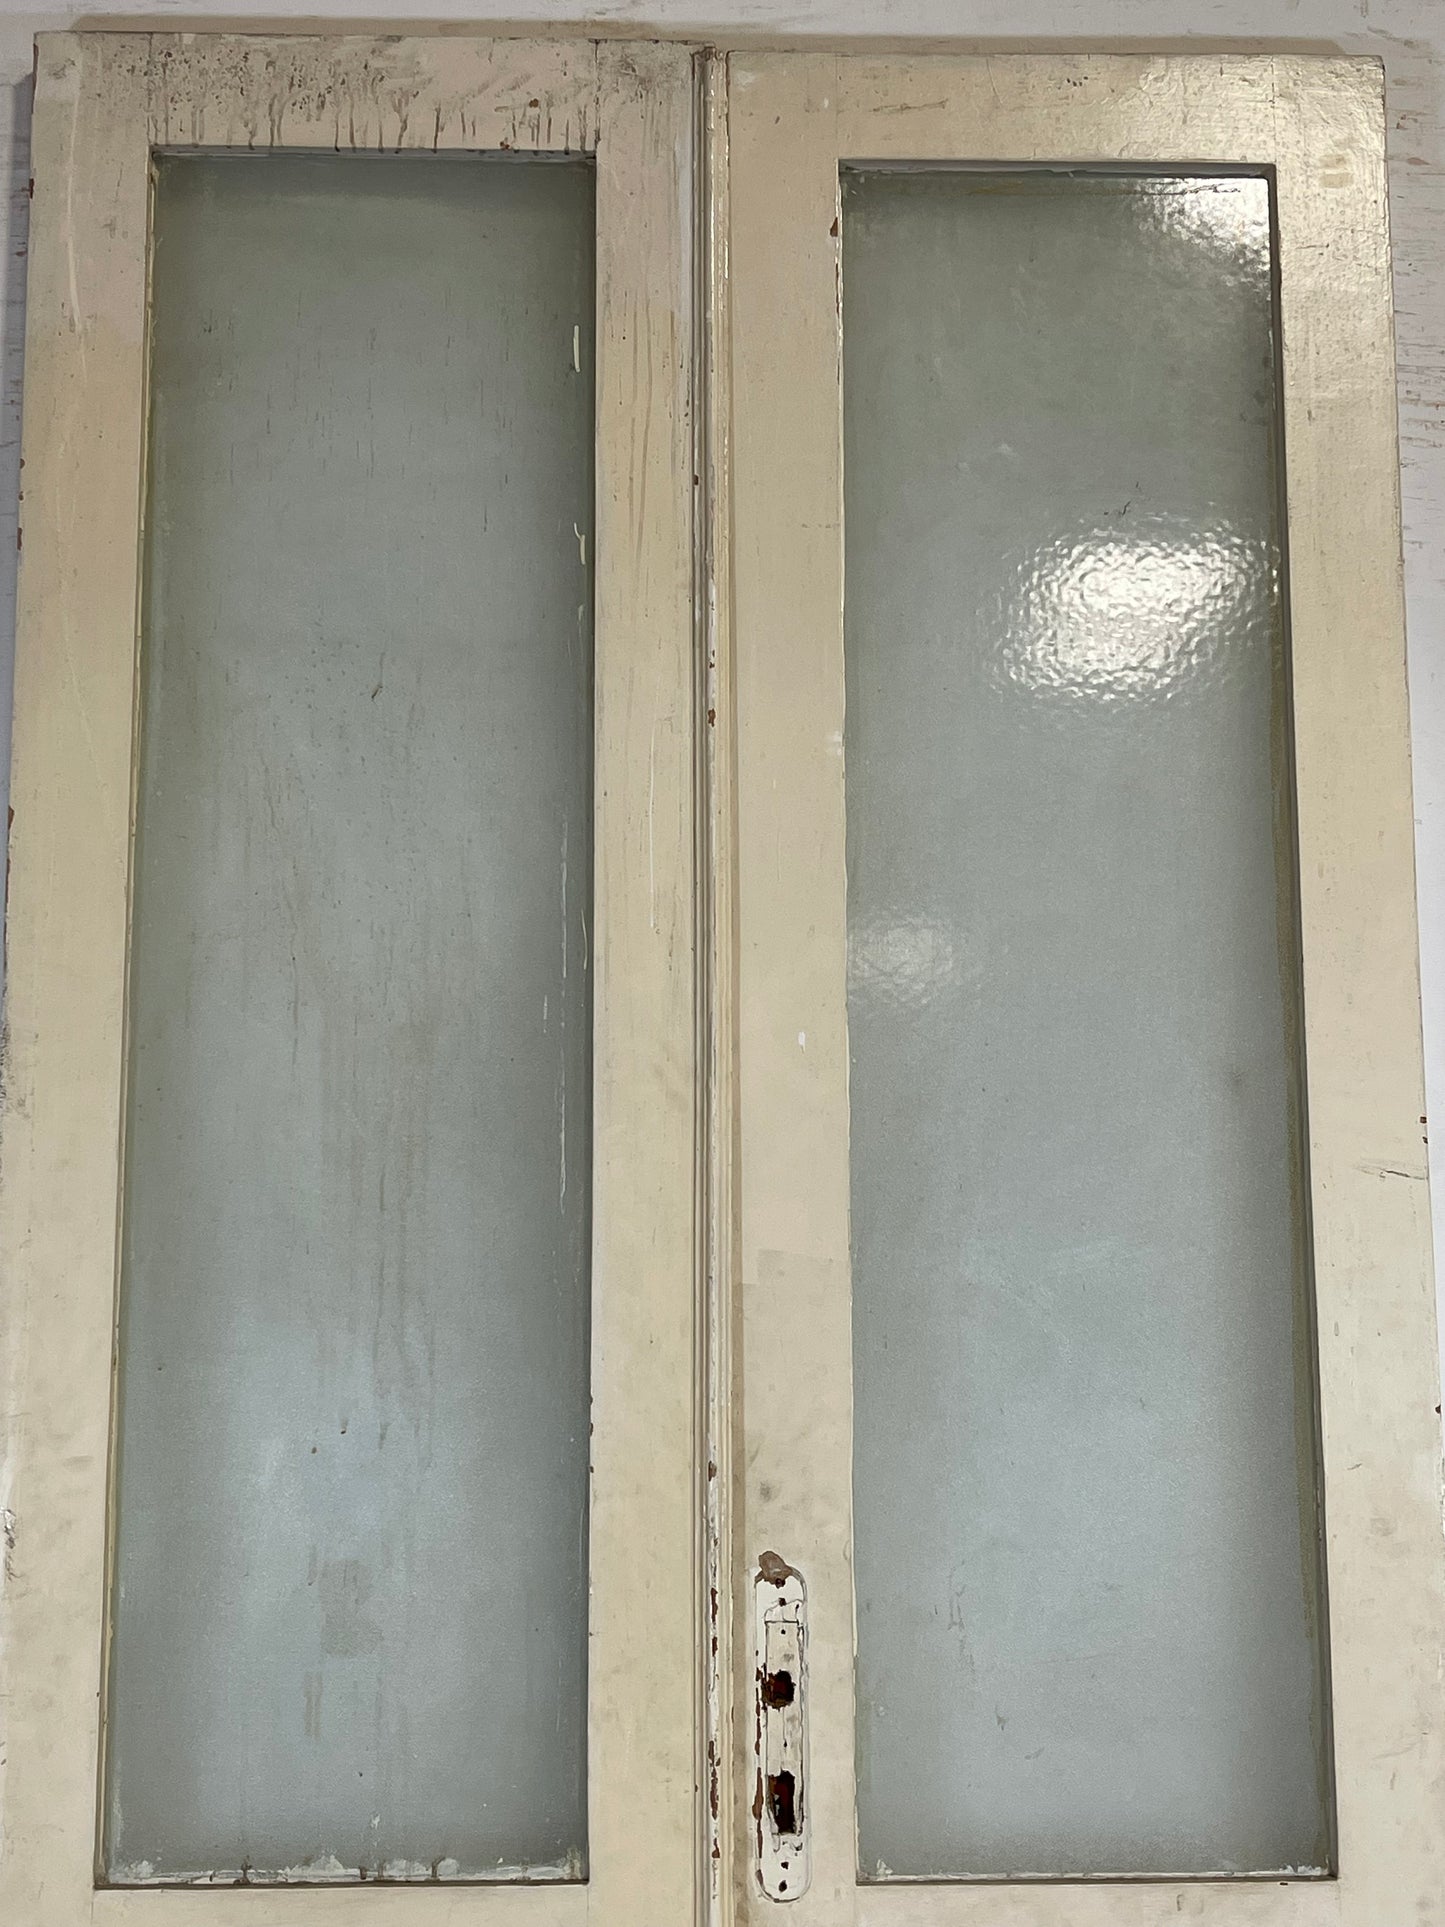 Antique French panel doors with glass (99.75x45.75) L114